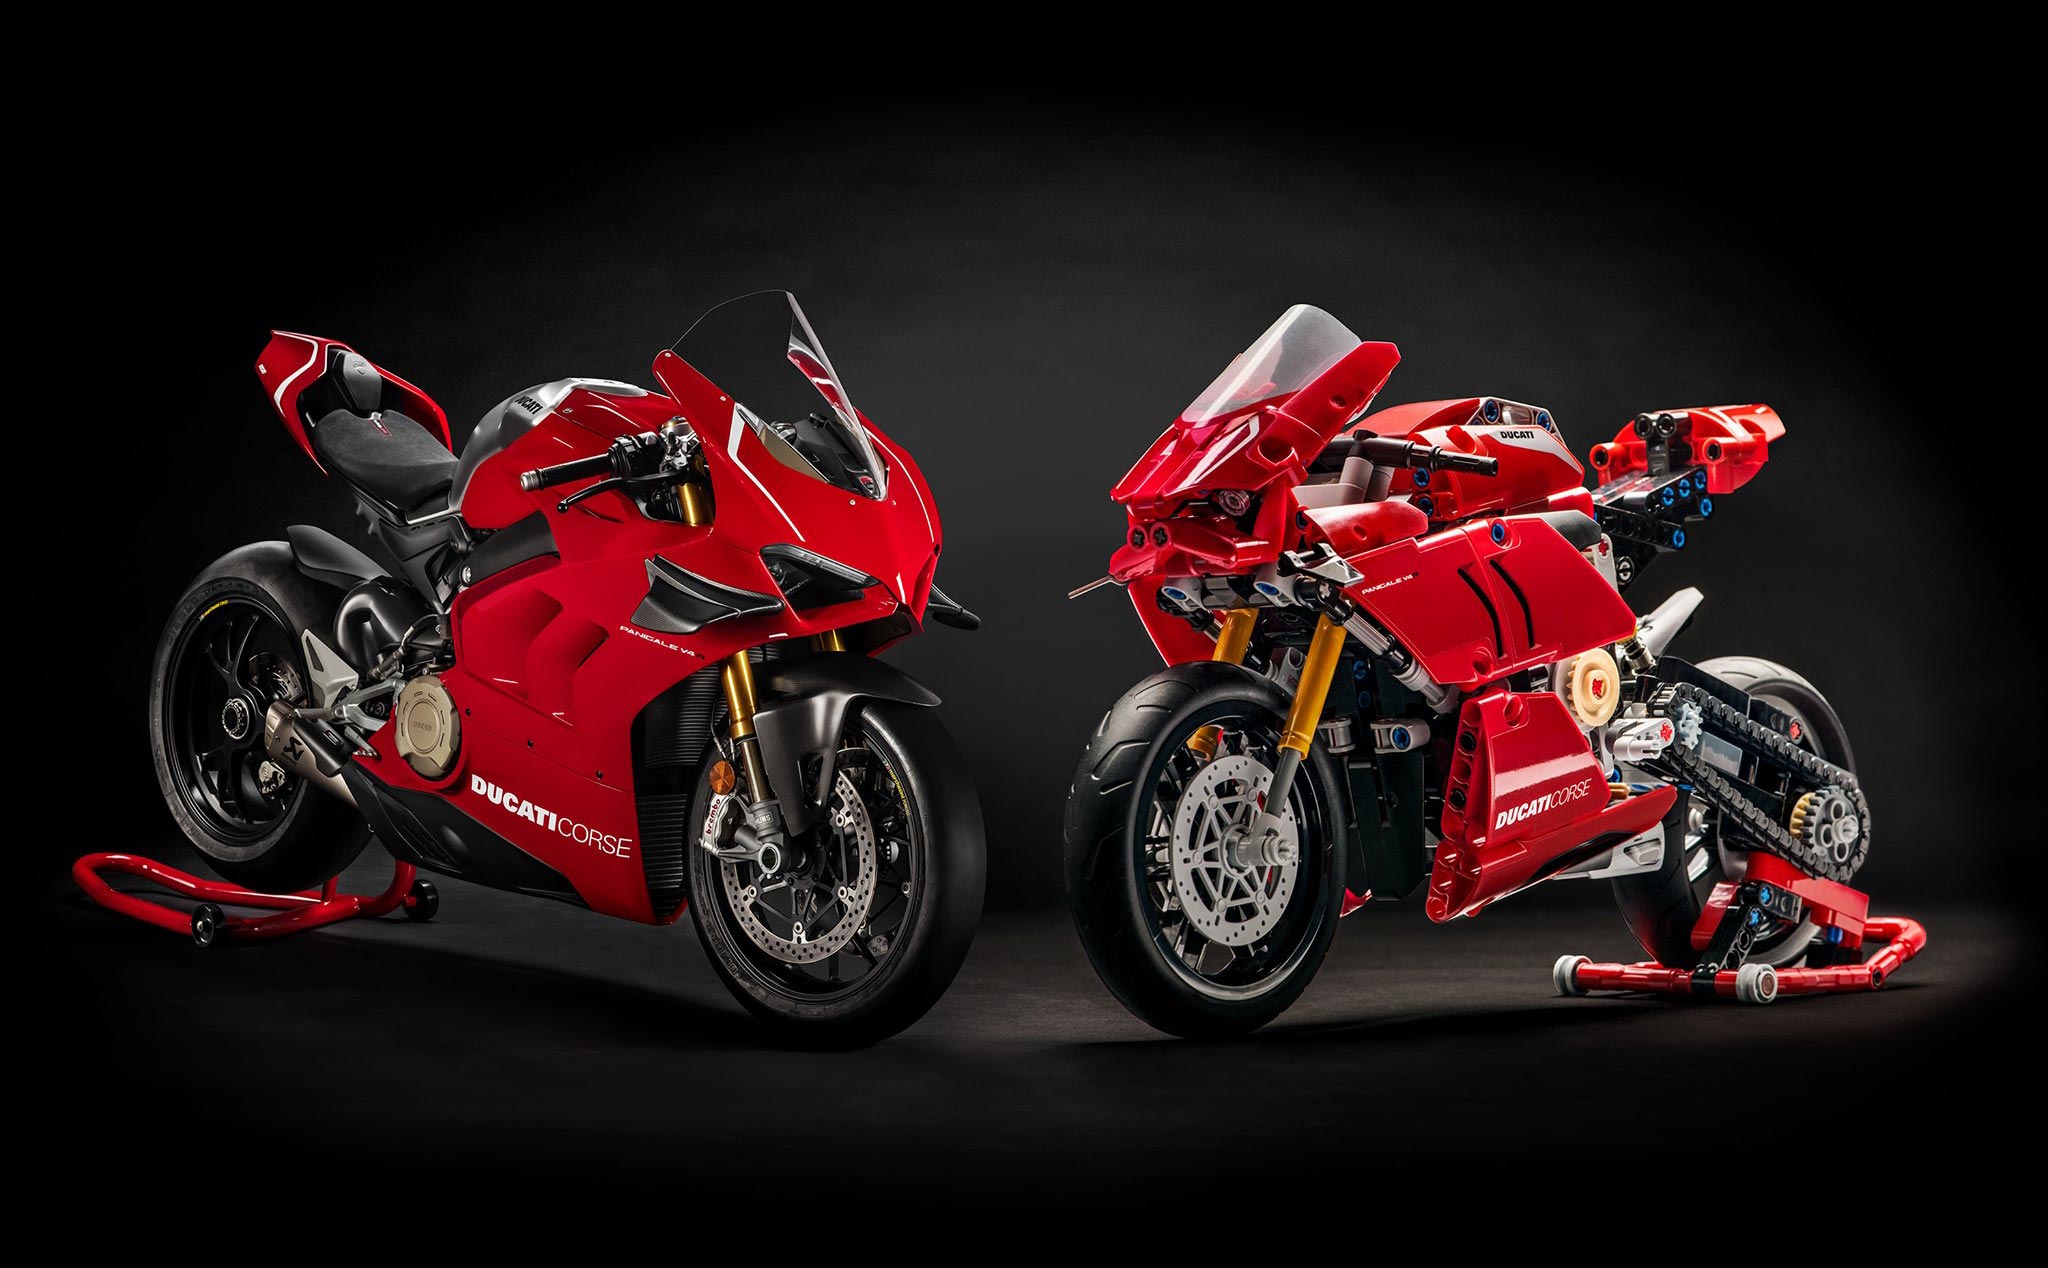 Exploring the Ducati Panigale V4 SP | Written by Enzo Le